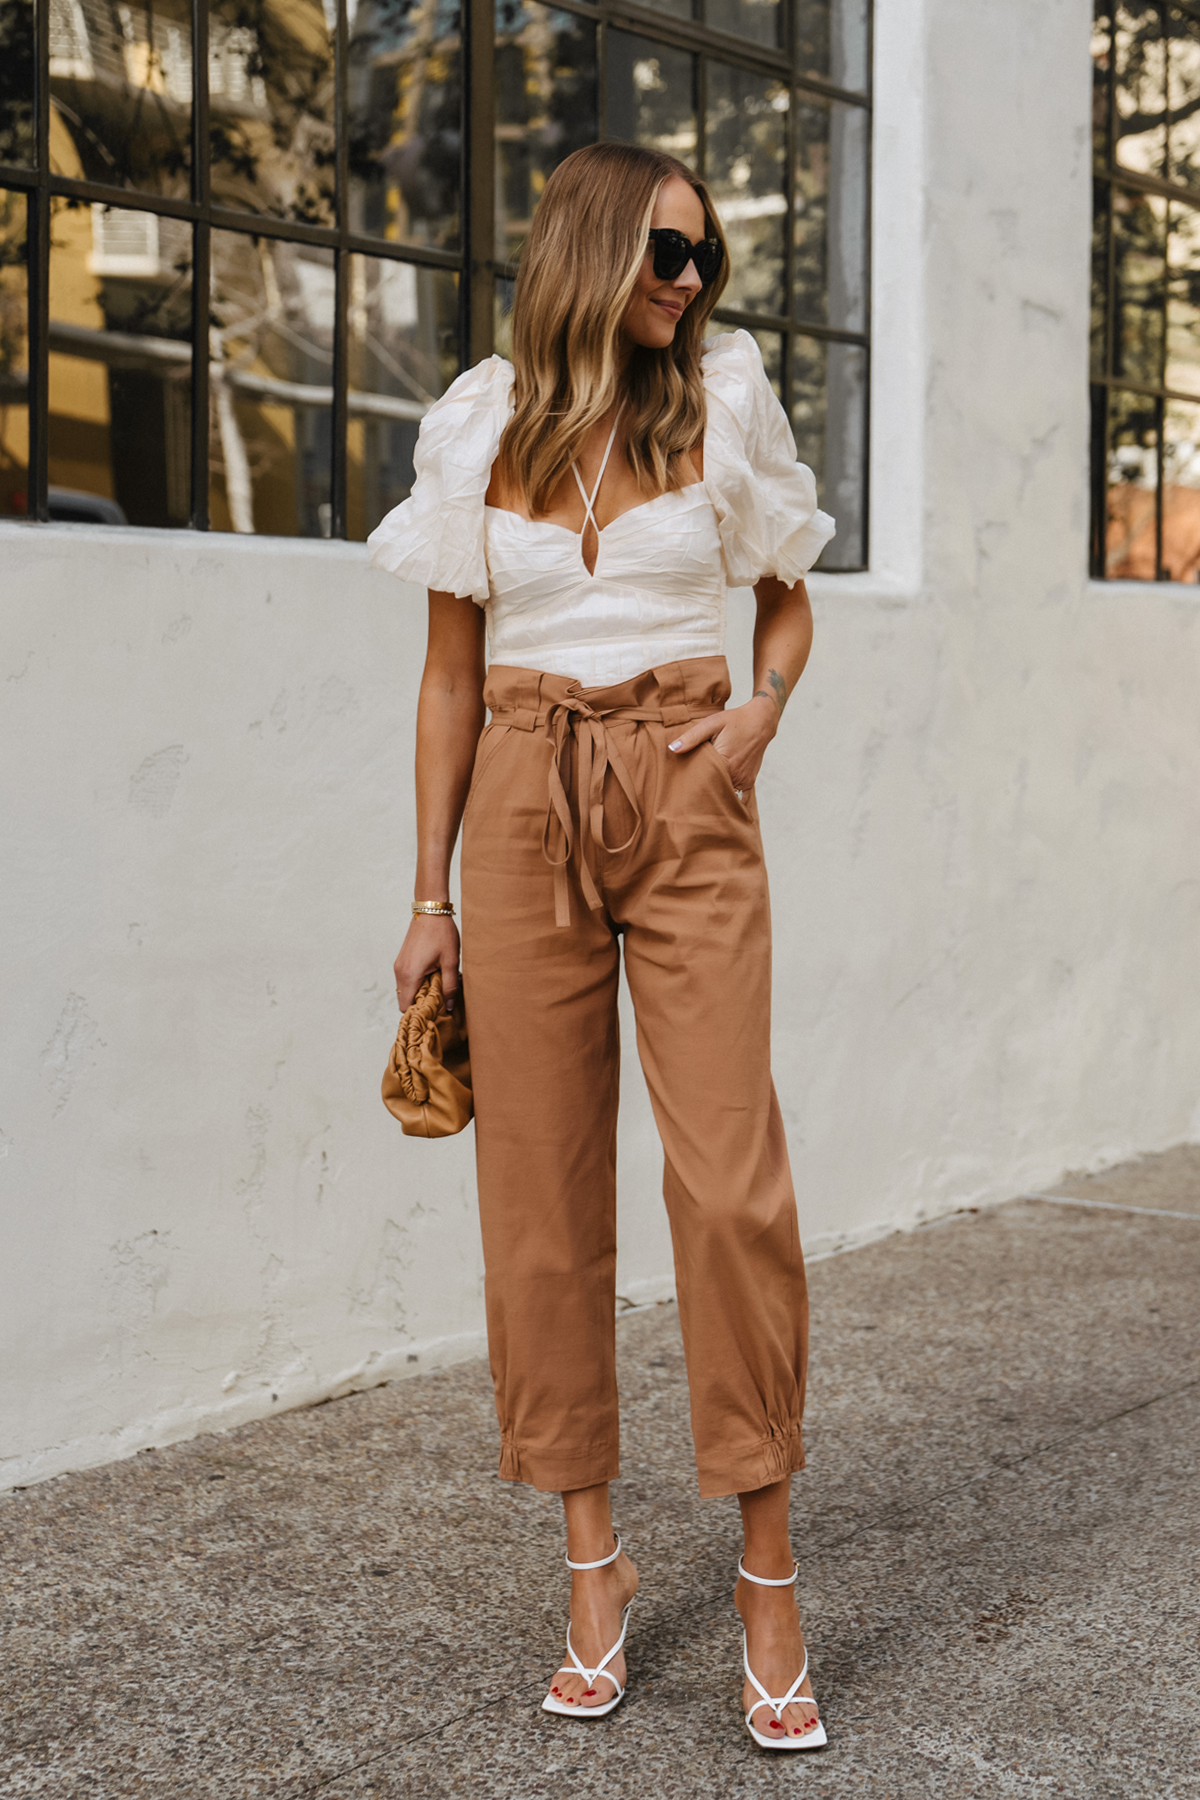 Fashion Jackson Wearing puff sleeve crop top outfit brown pants womens outfit bottega veneta stretch sandals white chic spring outfit 2022 street style 1